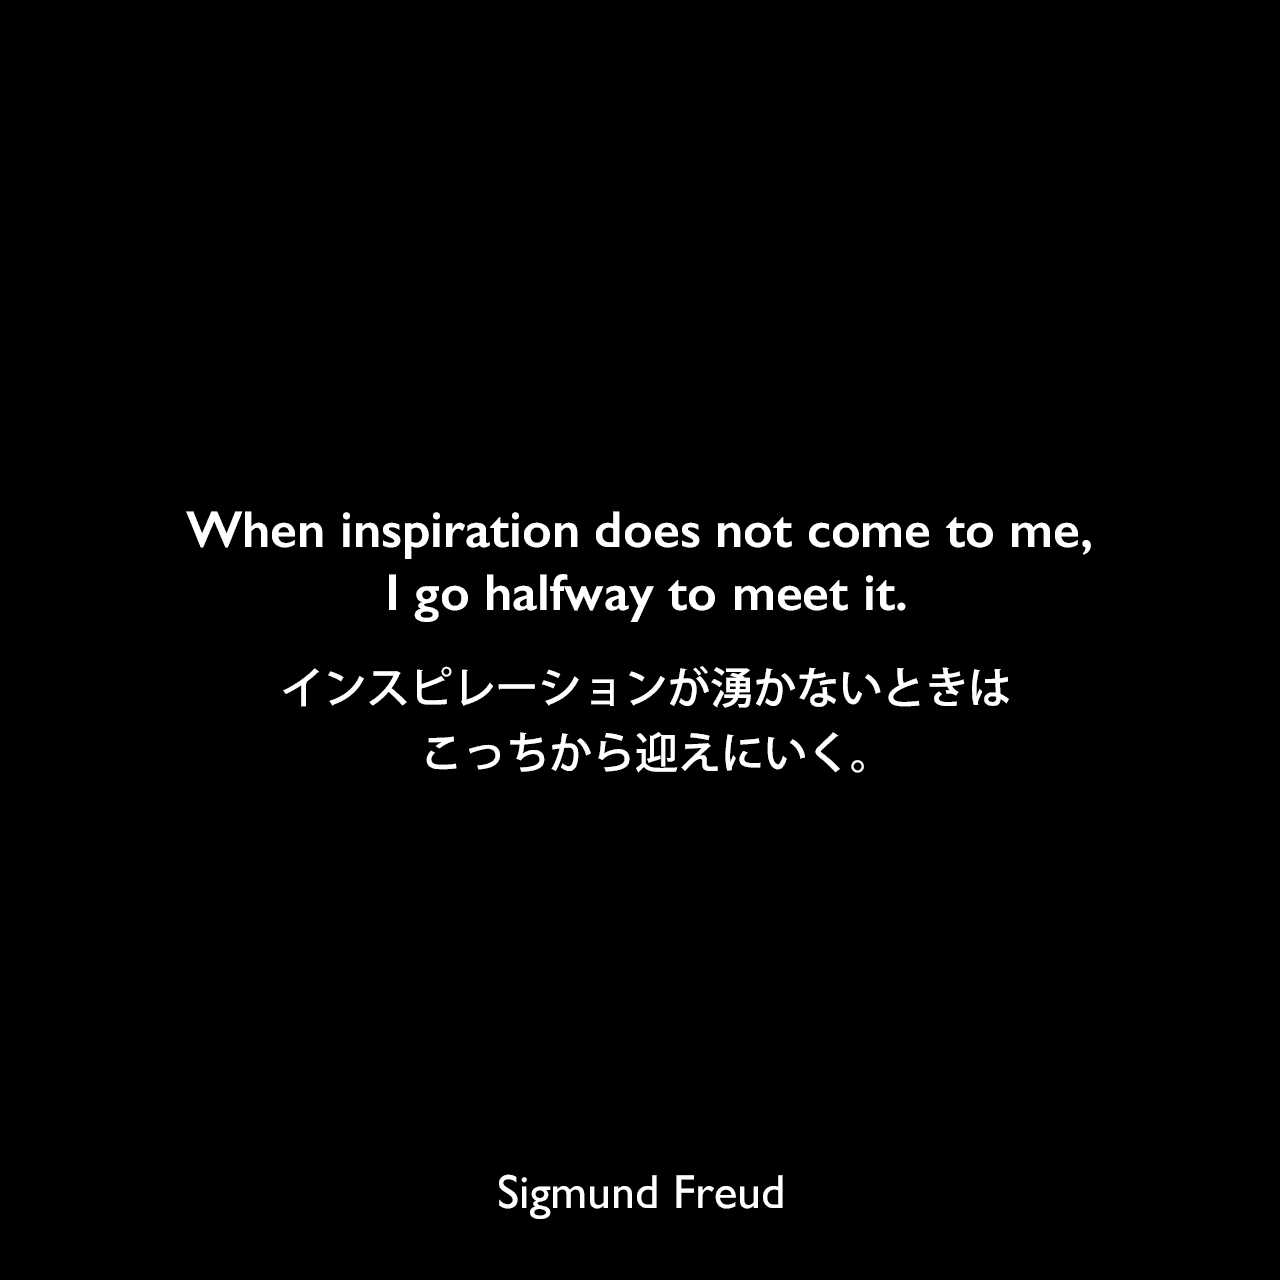 When inspiration does not come to me, I go halfway to meet it.インスピレーションが湧かないときはこっちから迎えにいく。Sigmund Freud